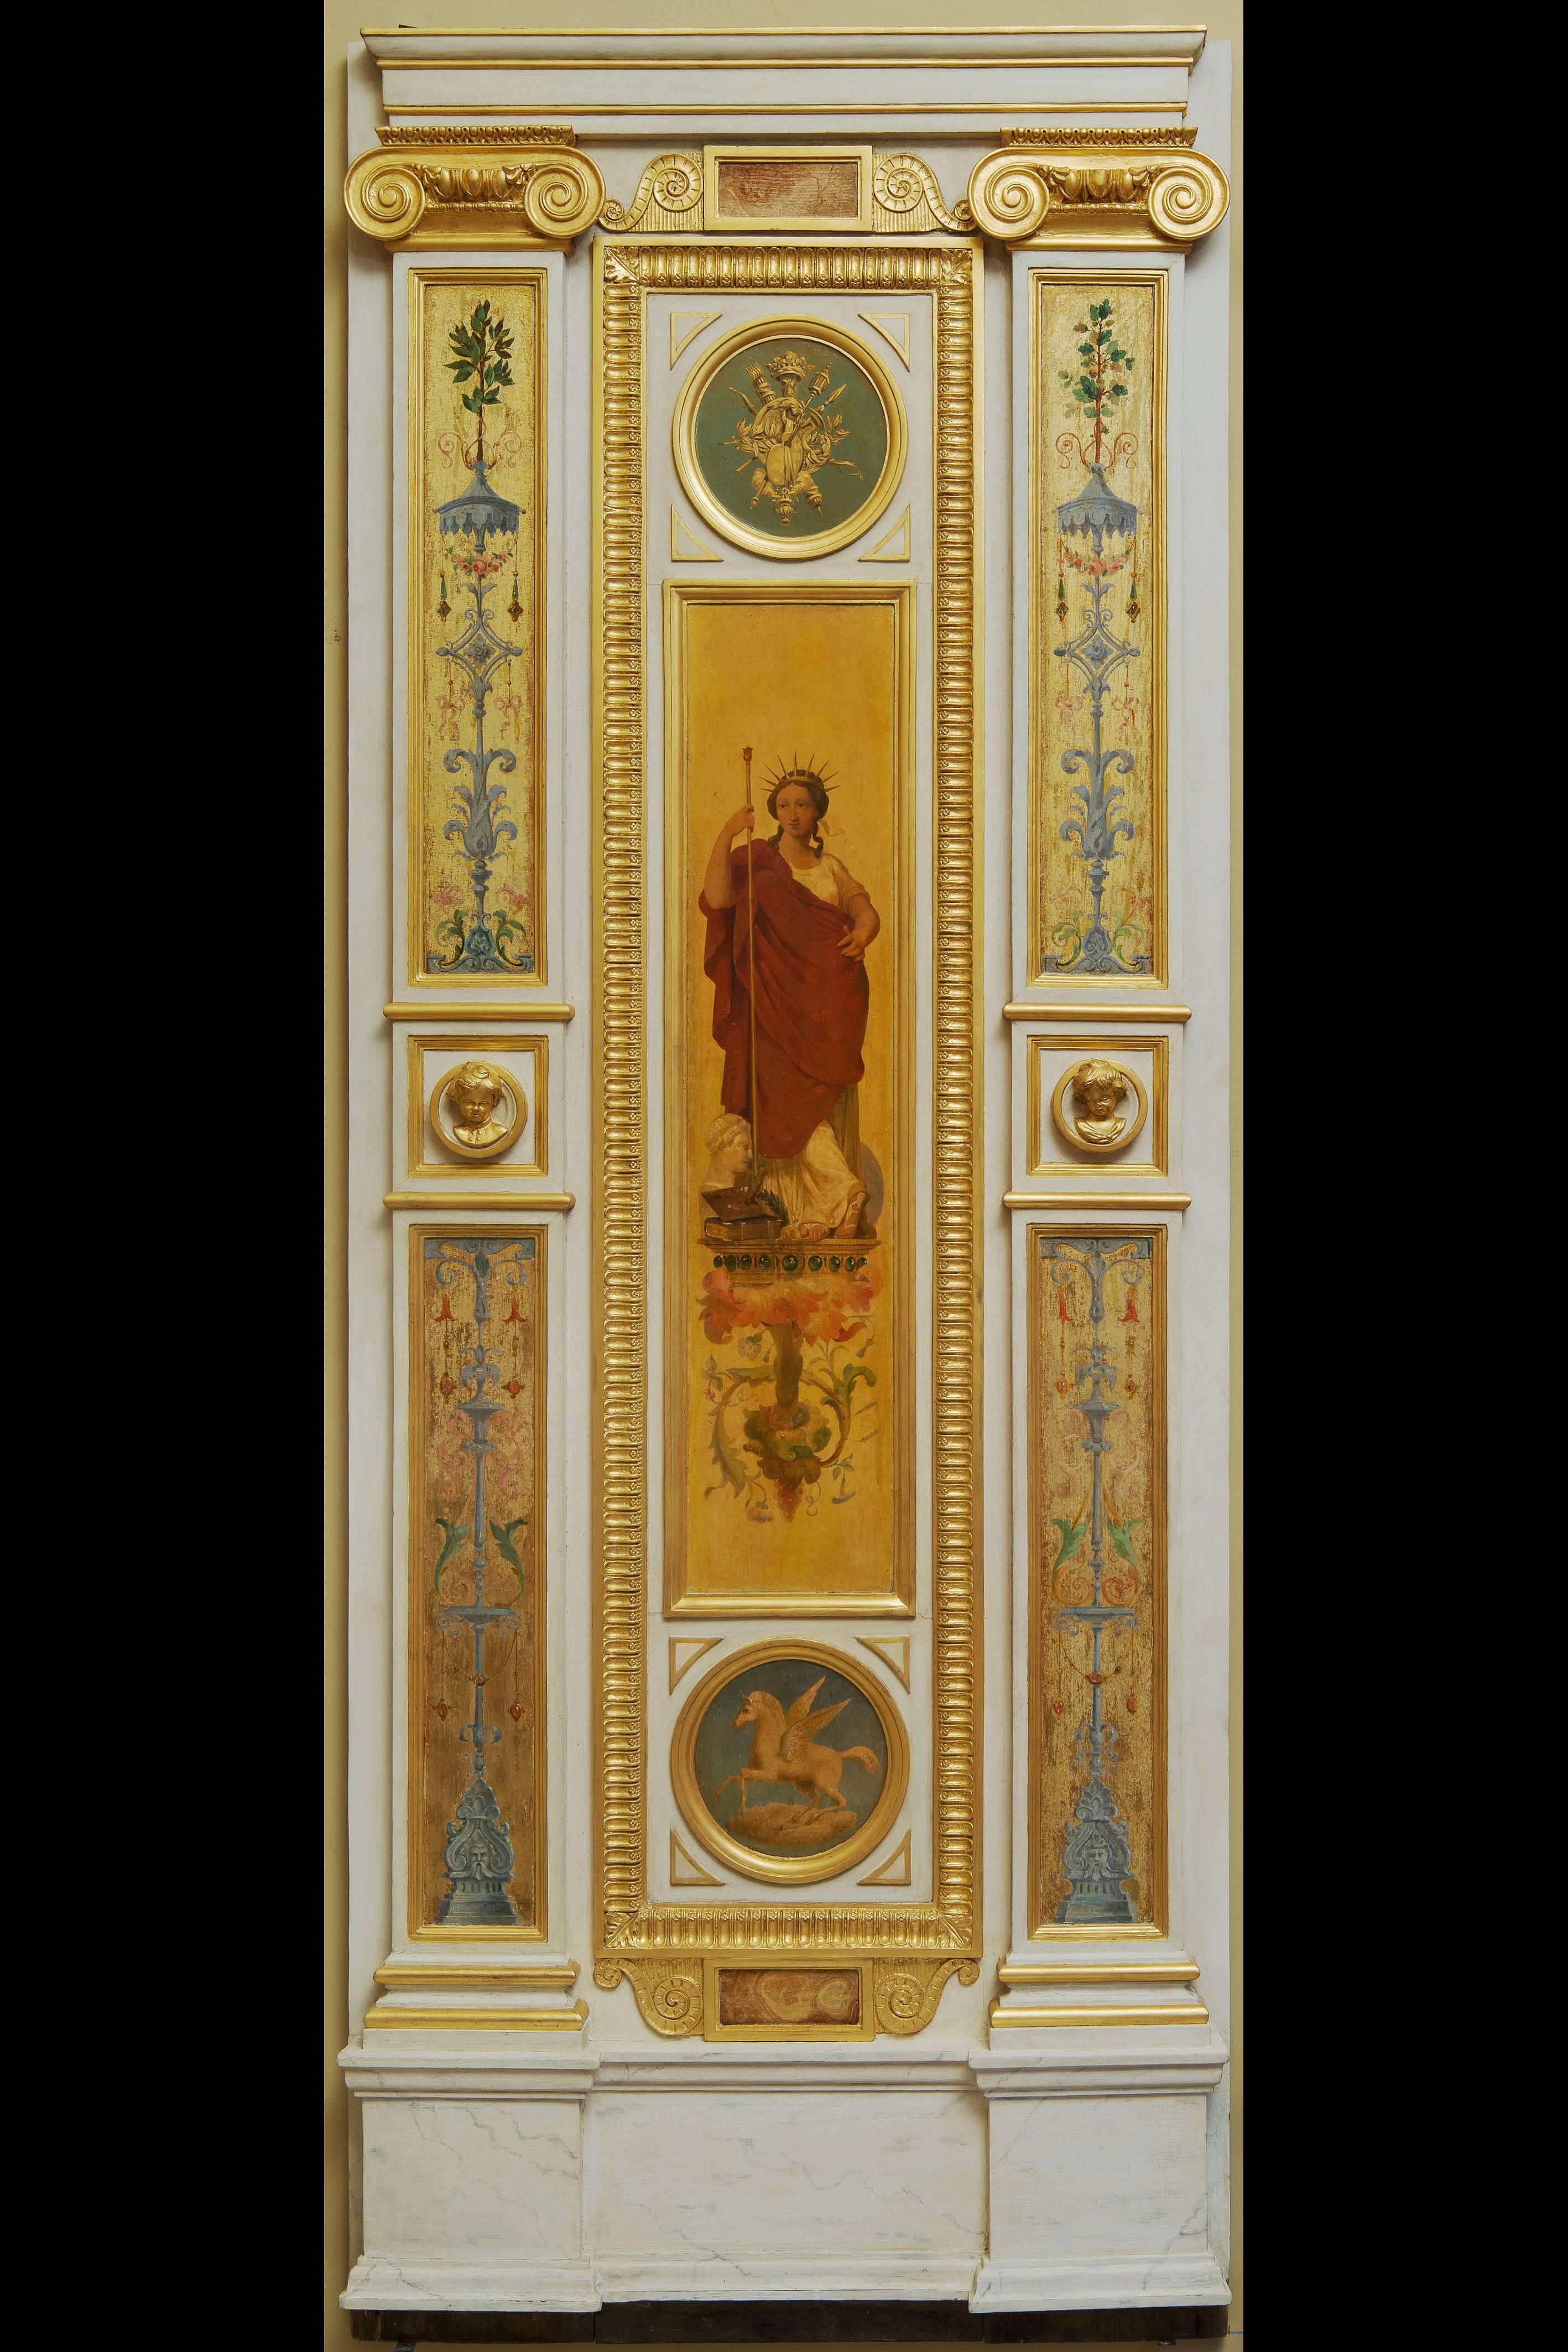 This entire set of "boiserie" decoration is painted and gilded, told "Aux Cinq Continents."
It is all painted in polychrome technic. 
The set:
Five panels composed of one central panel and two pilasters 233/91 cm.
Ten simple